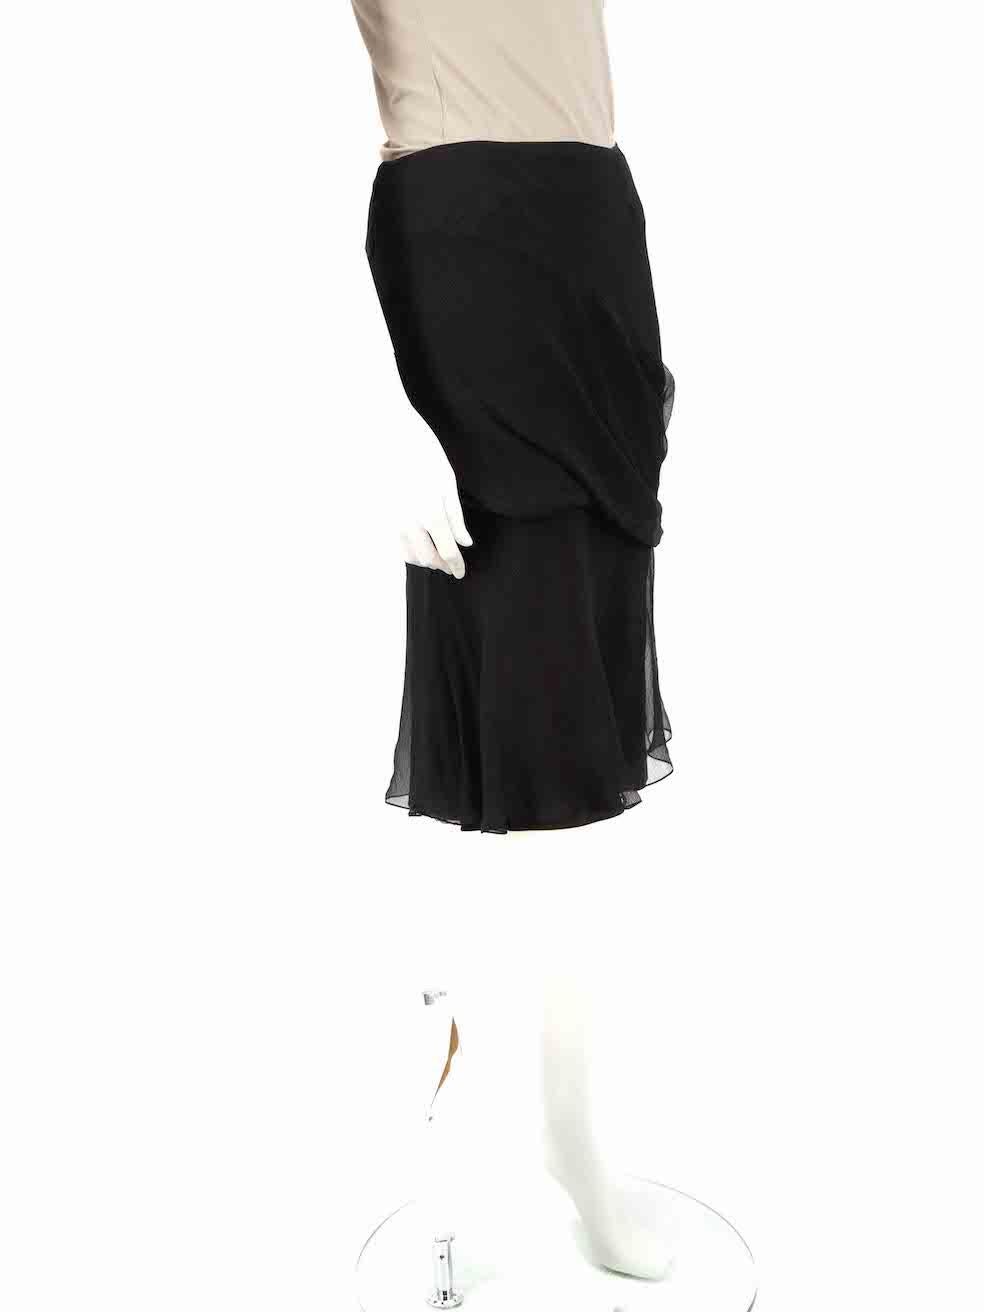 CONDITION is Very good. Minimal wear to skirt is evident. Minimal wear to the left-side seam with a small tear at the base of the button fastening and tears found on draped detail on this used Dior designer resale item.
 
 
 
 Details
 
 
 Vintage
